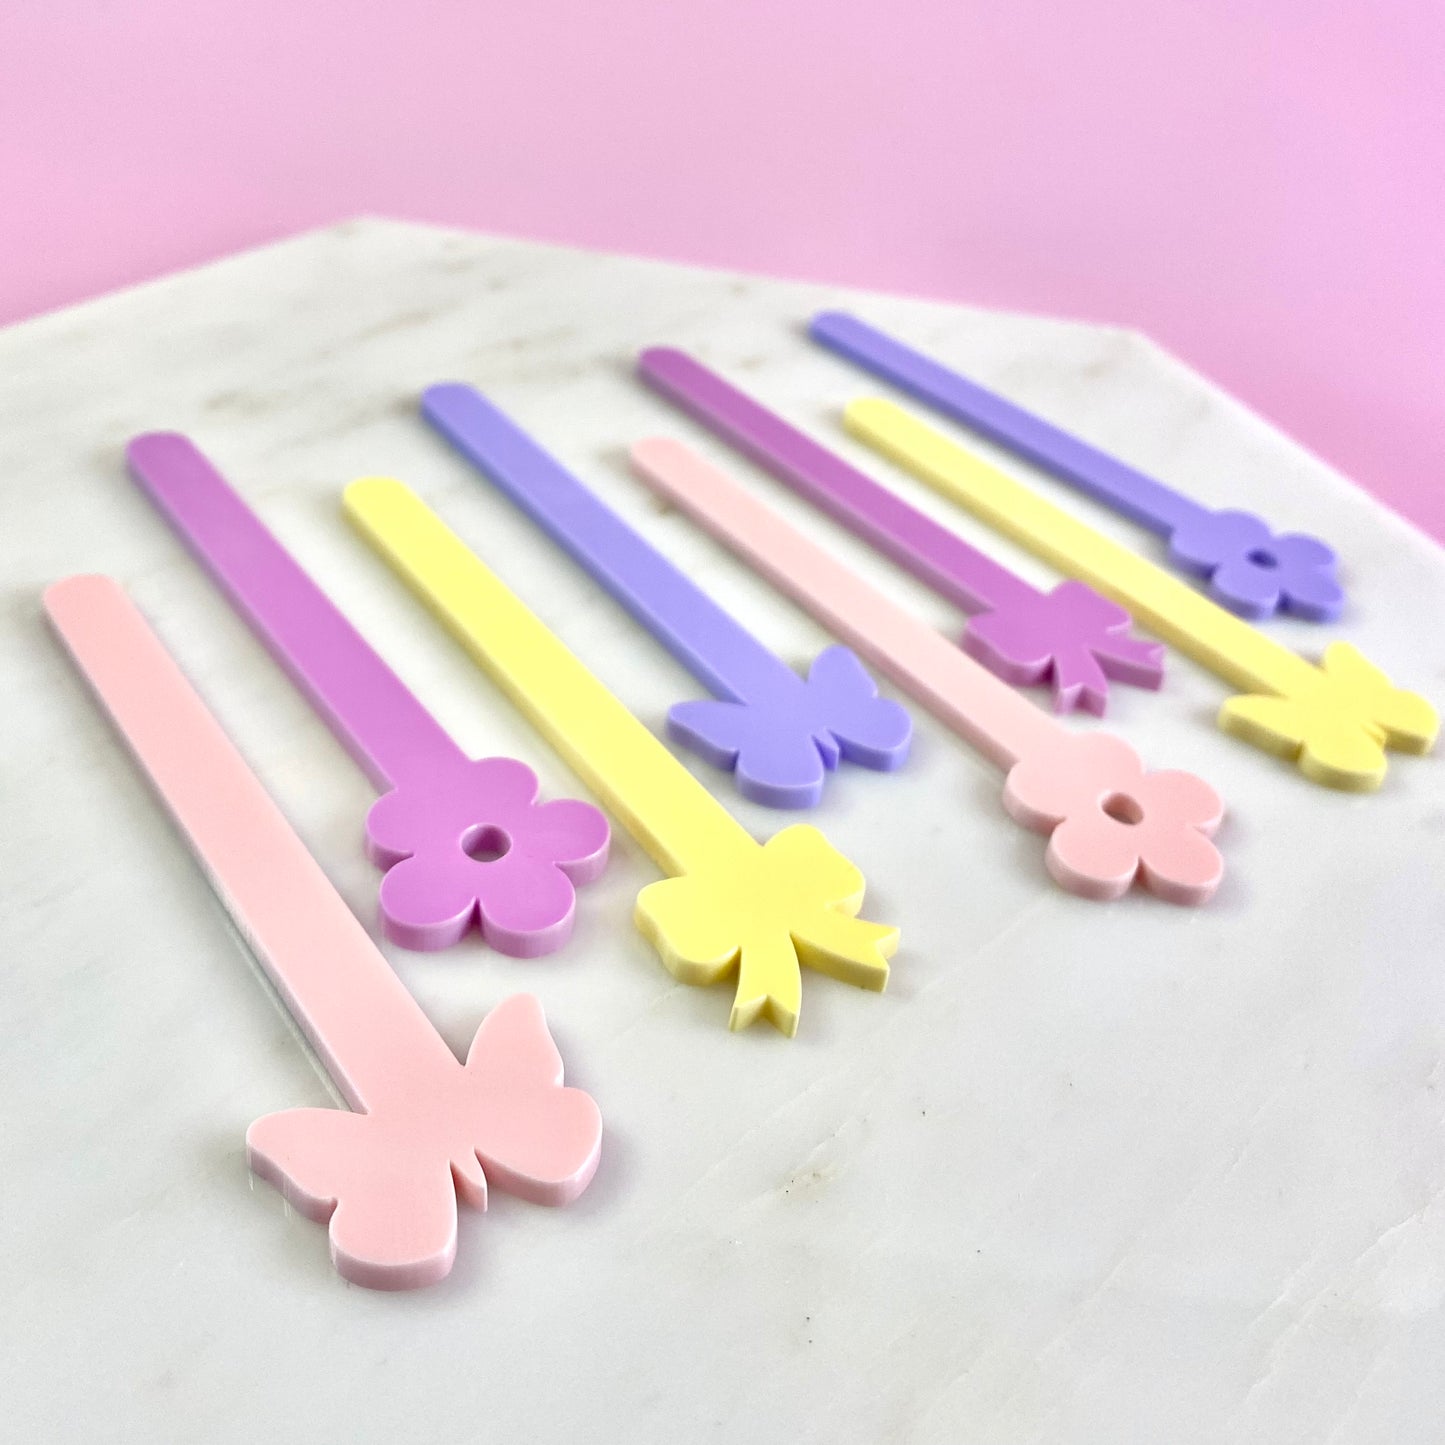 BOW BUTTERFLY FLOWER CAKESICLE STICKS - PACK OF 6